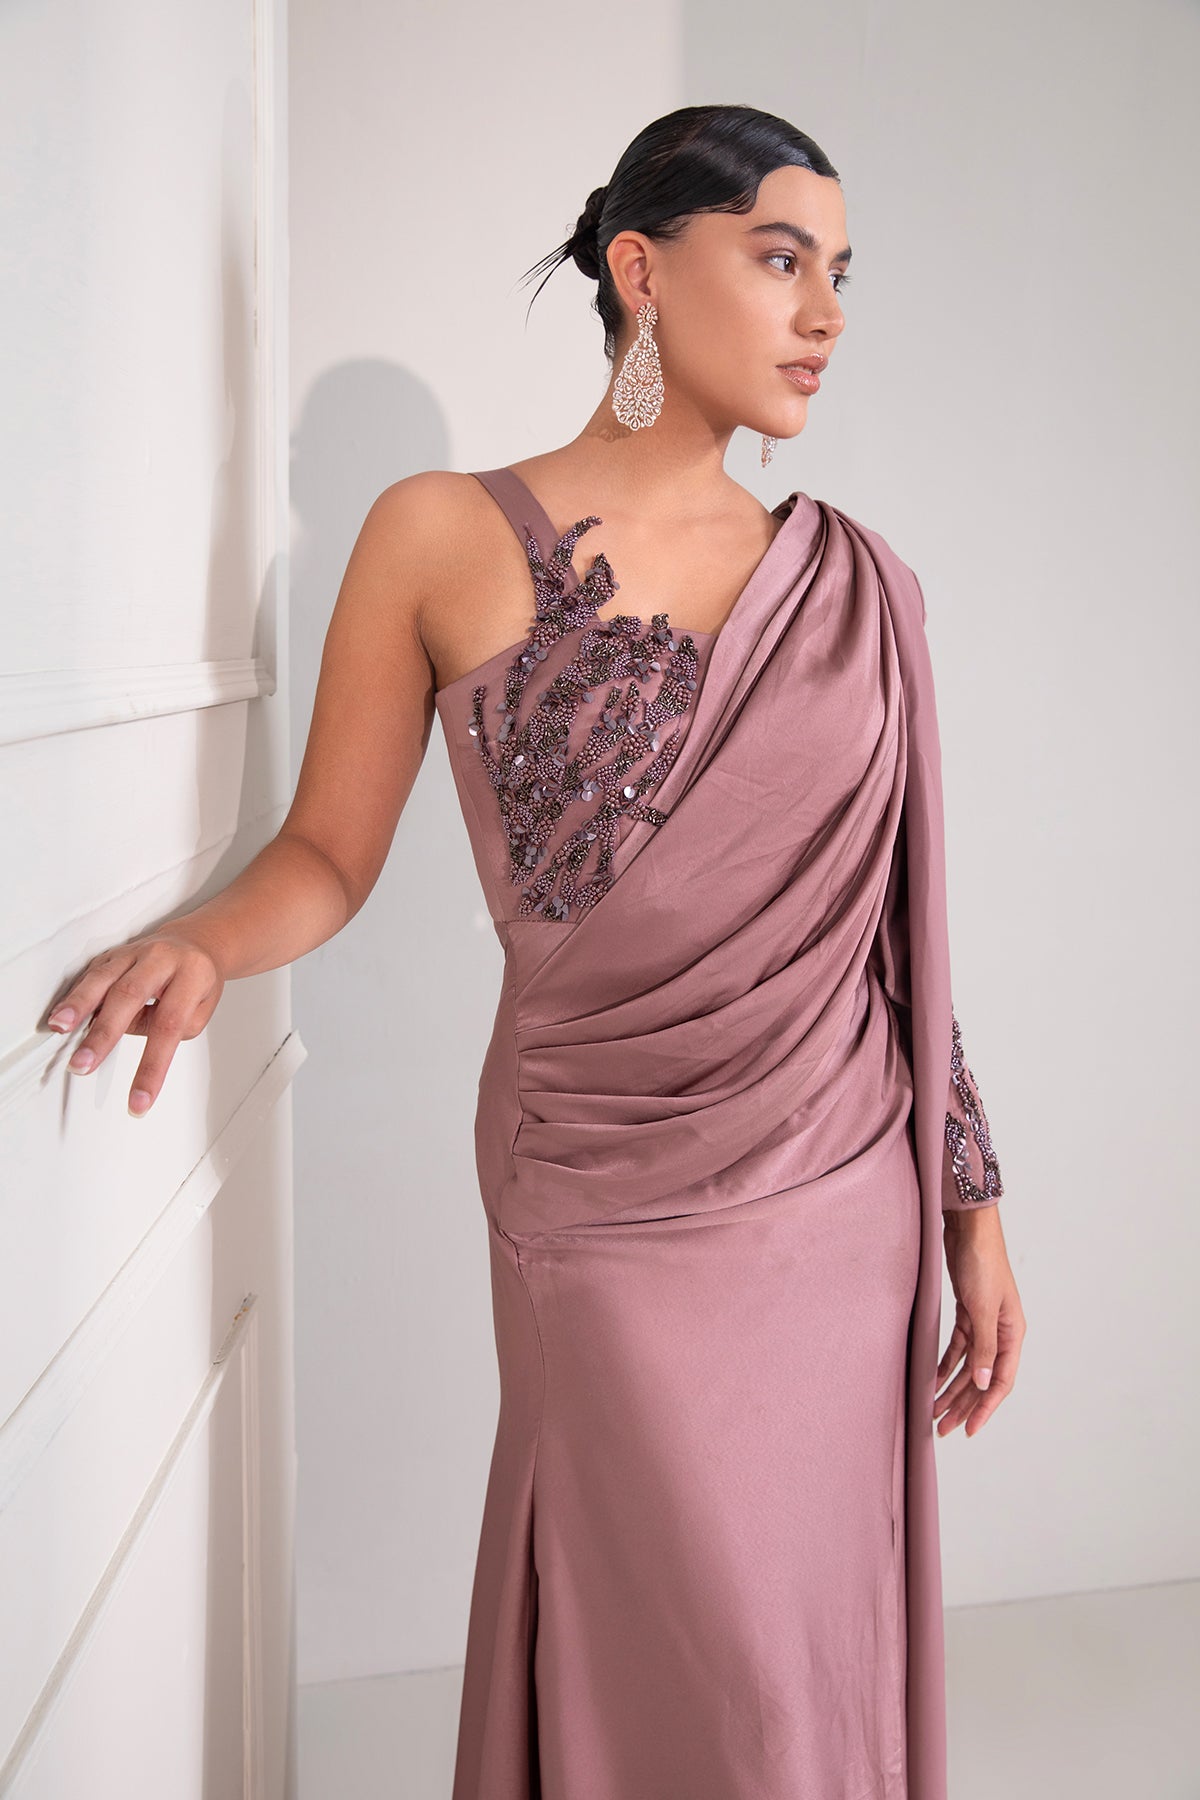 Dusty Mauve draped gown with dramatic Blazer sleeves & tonal embroidery